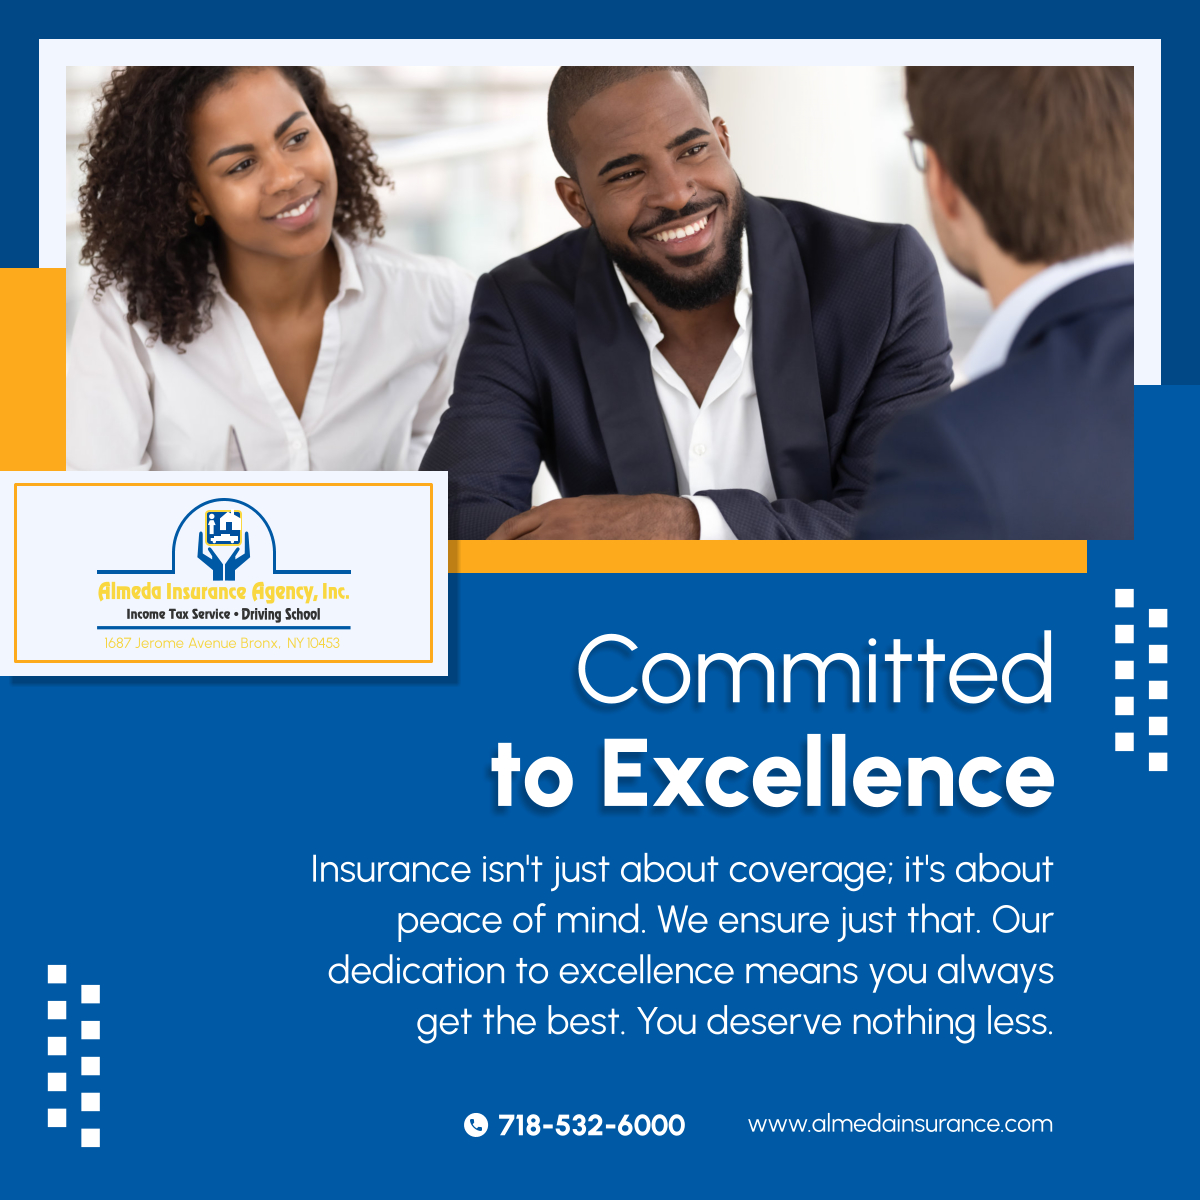 Excellence in insurance means providing peace of mind and ensuring that every client feels secure, knowing they have the best coverage available. With our commitment to excellence, rest assured you're in good hands. 

#TheBronxNY #InsuranceExcellence #PeaceOfMindCoverage